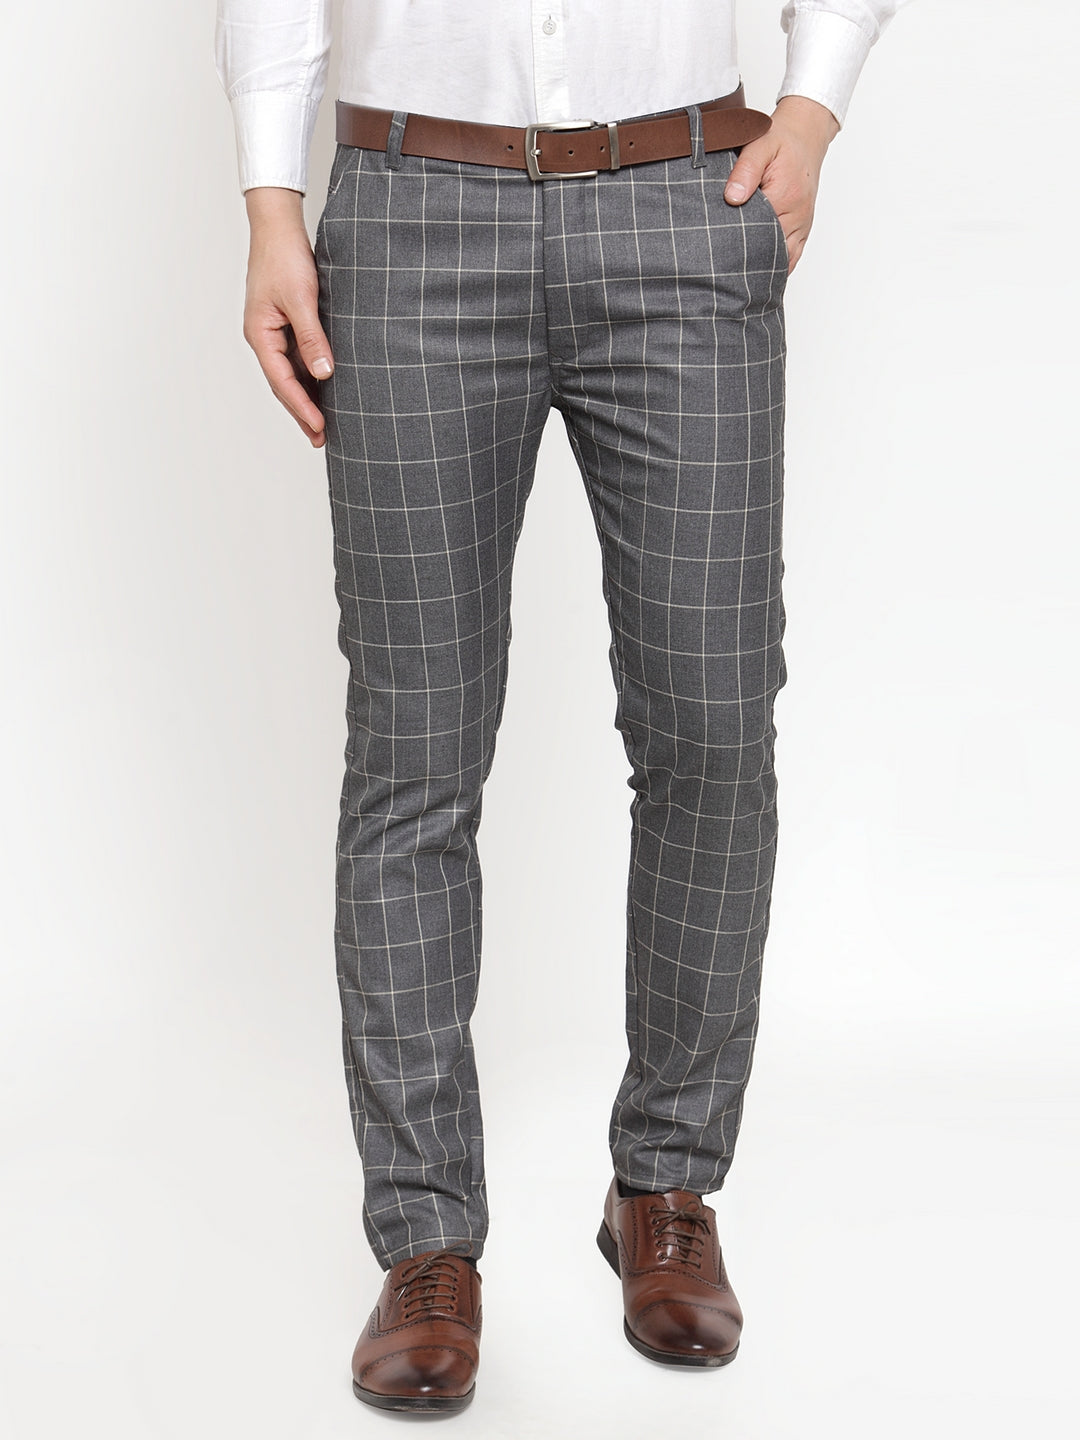 Decible Polyster Blend Formal Trousers For Man |formal Gray pants | grey  pant trousers for